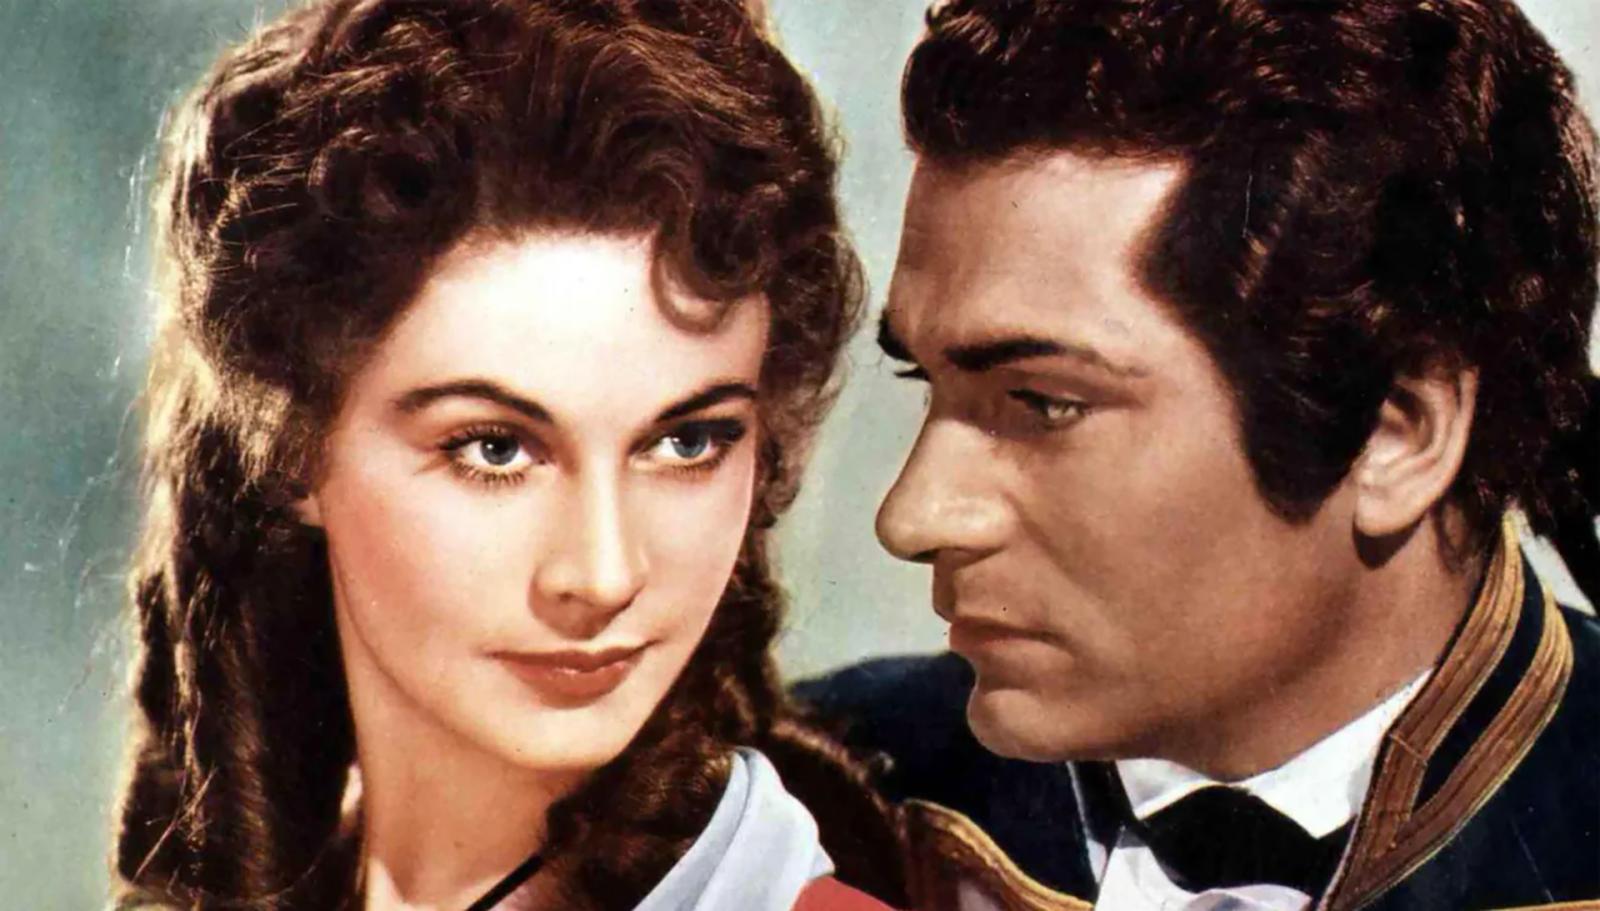 Vivien Leigh Left Her Husband for a Married Lover and Ended Up Insane - image 2